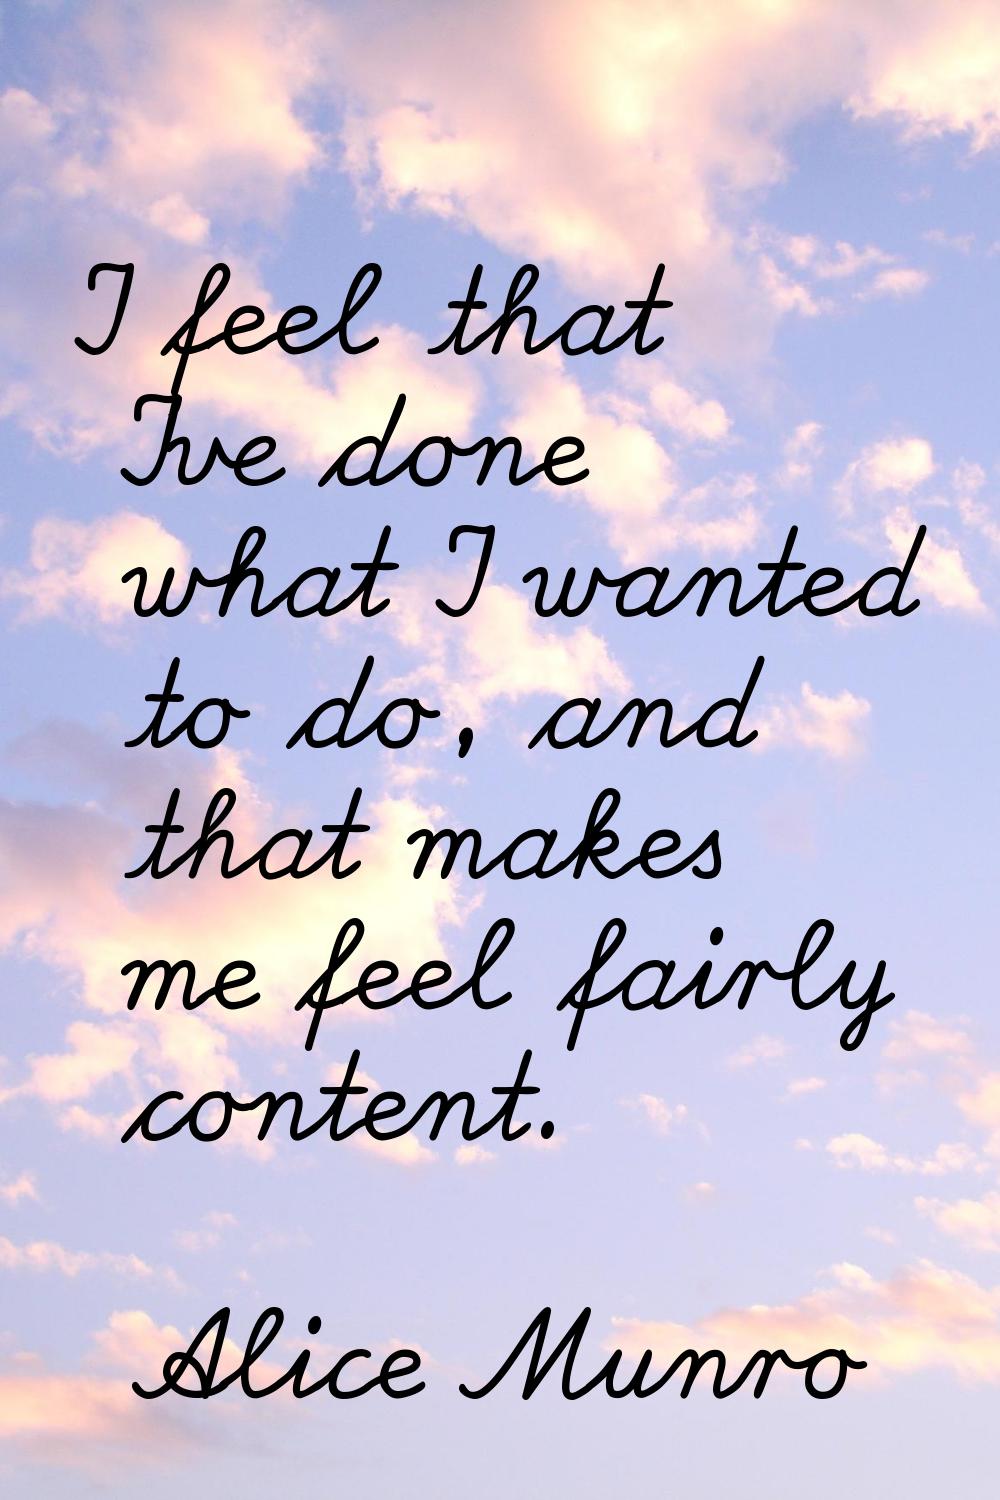 I feel that I've done what I wanted to do, and that makes me feel fairly content.